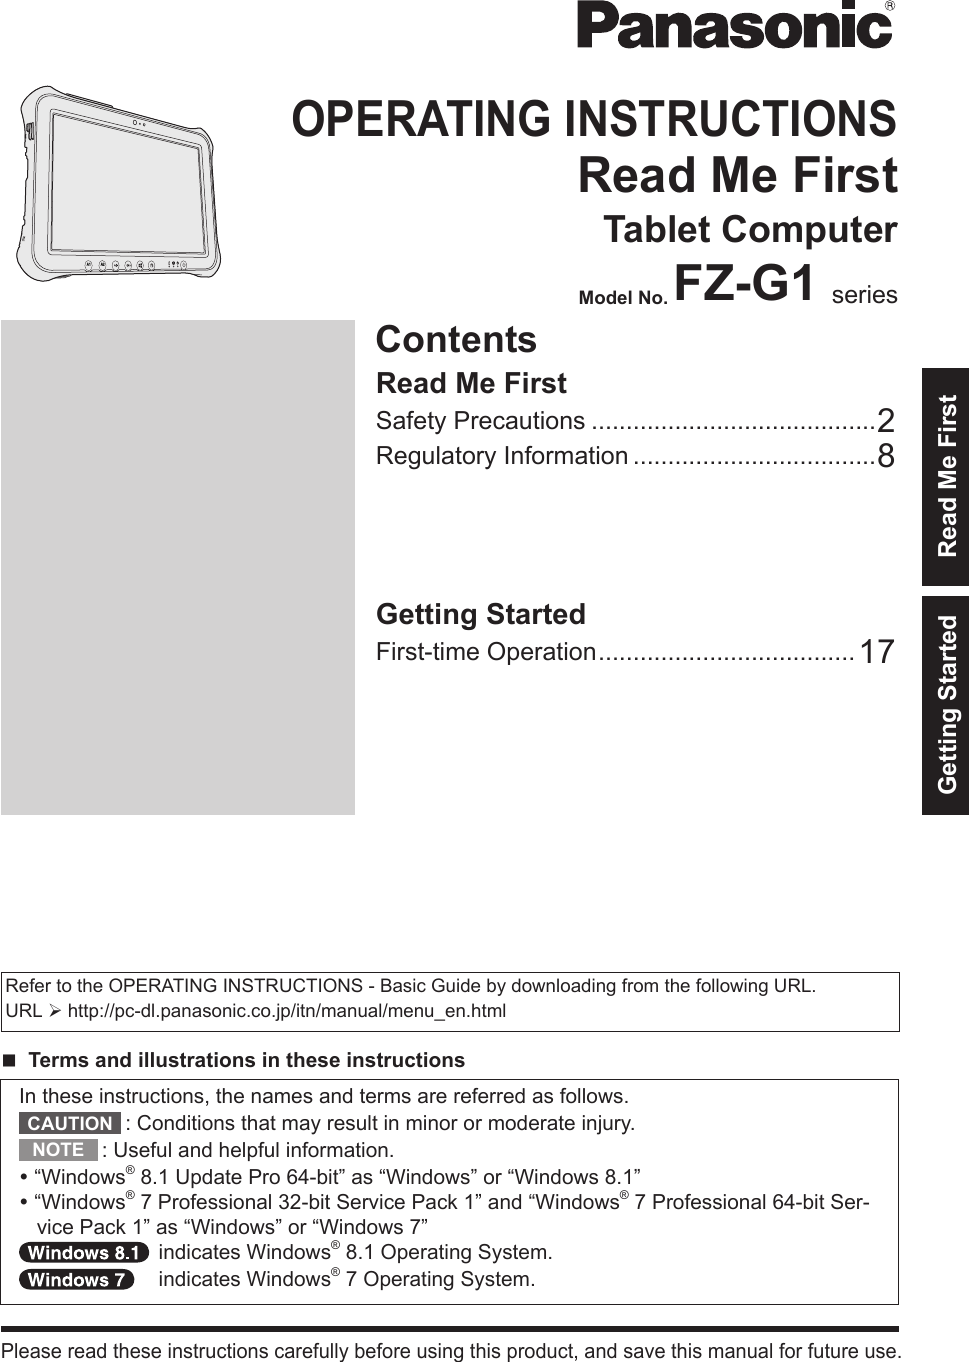 ContentsOPERATING INSTRUCTIONSRead Me FirstTablet ComputerModel No. FZ-G1 seriesGetting StartedFirst-time Operation .....................................17Read Me FirstSafety Precautions .........................................2Regulatory Information ...................................8A2A1Please read these instructions carefully before using this product, and save this manual for future use.Getting Started Read Me FirstIn these instructions, the names and terms are referred as follows.: Conditions that may result in minor or moderate injury.: Useful and helpful information. “Windows® 8.1 Update Pro 64-bit” as “Windows” or “Windows 8.1” “Windows® 7 Professional 32-bit Service Pack 1” and “Windows® 7 Professional 64-bit Ser-vice Pack 1” as “Windows” or “Windows 7”  indicates Windows® 8.1 Operating System.  indicates Windows® 7 Operating System.Refer to the OPERATING INSTRUCTIONS - Basic Guide by downloading from the following URL.URL Øhttp://pc-dl.panasonic.co.jp/itn/manual/menu_en.htmln Terms and illustrations in these instructionsCAUTIONNOTE